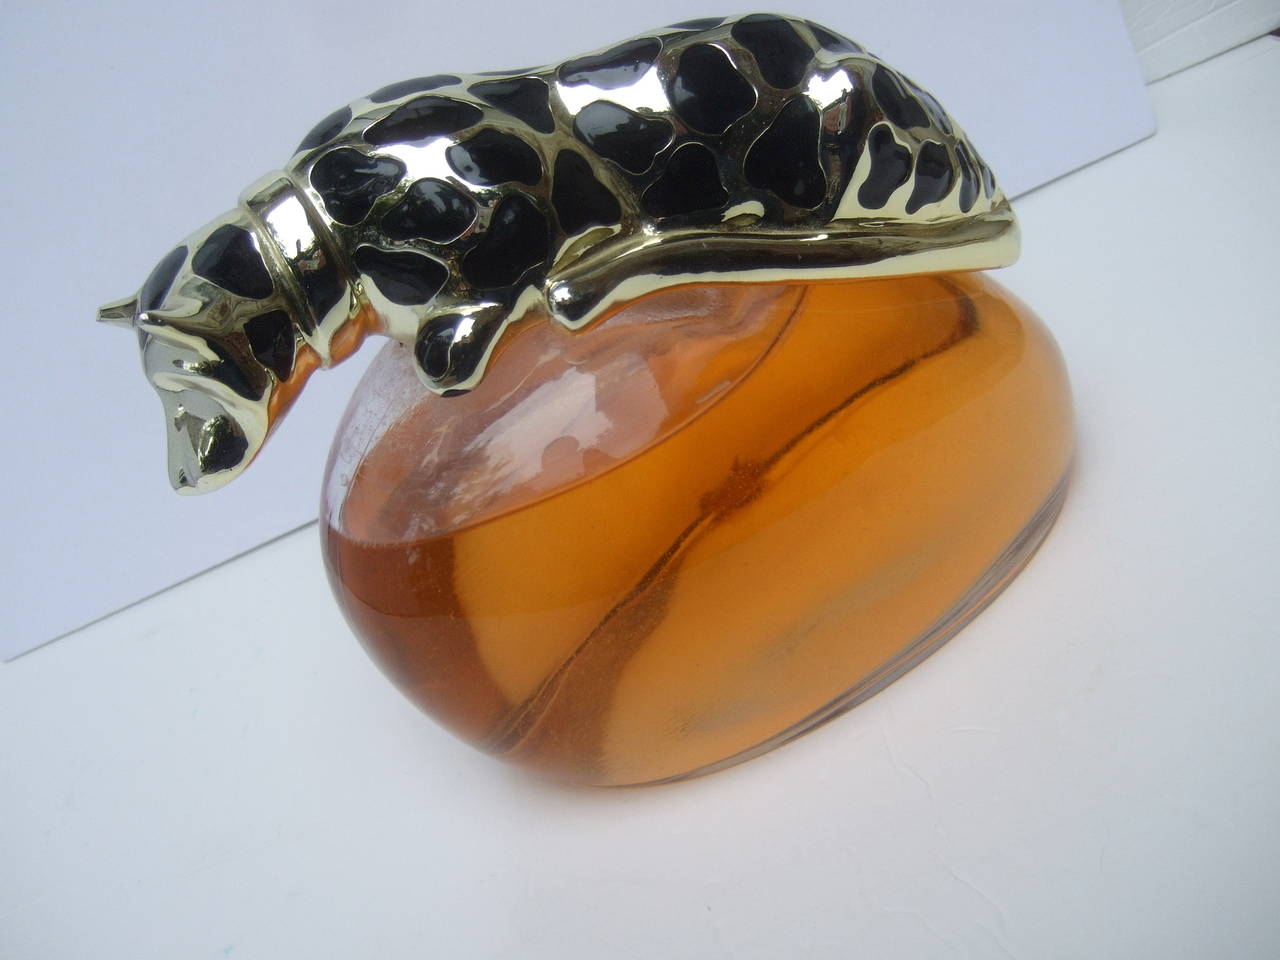 Opulent large factice perfume display bottle with panther stopper c 1980
The huge fragrance dummy bottle was a display at a Beverly Hills
boutique in the 1980s

The lavish fragrance display bottle is unlabeled without a designer fragrance label.